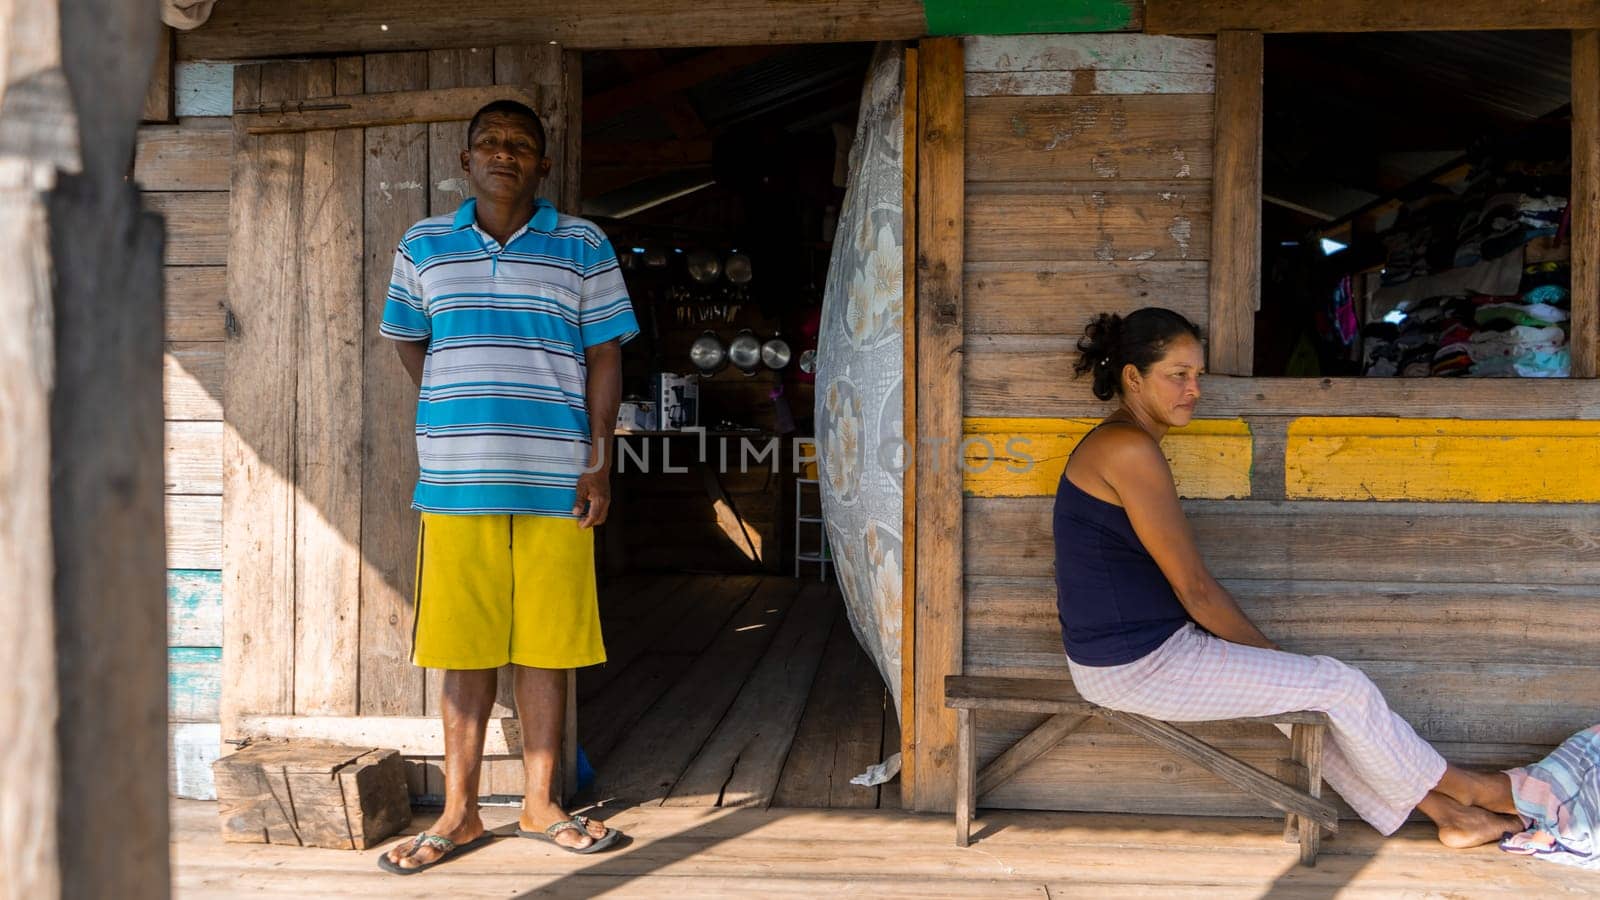 Indigenous man and woman outside their wooden house in the caribbean of Nicaragua